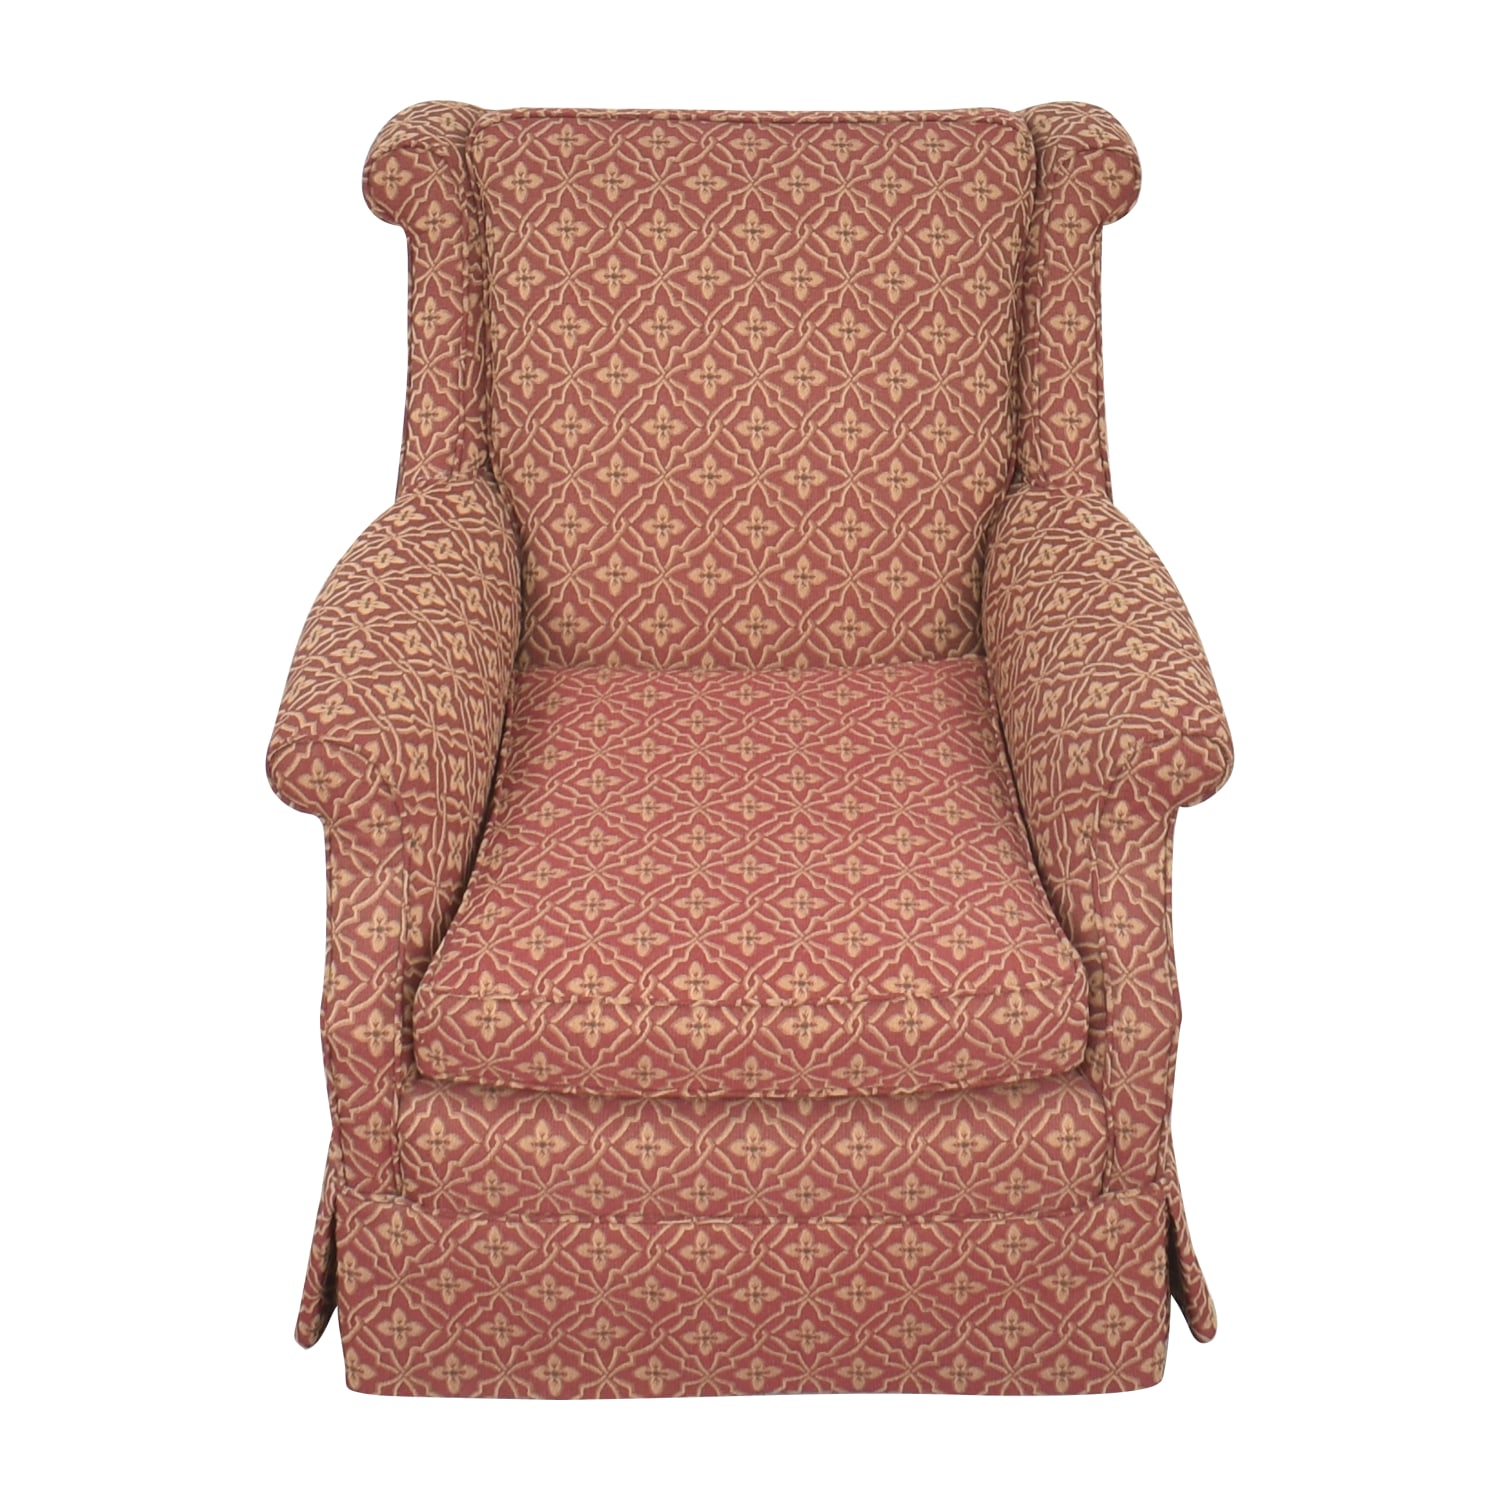  Traditional Scroll Arm Accent Chair Accent Chairs